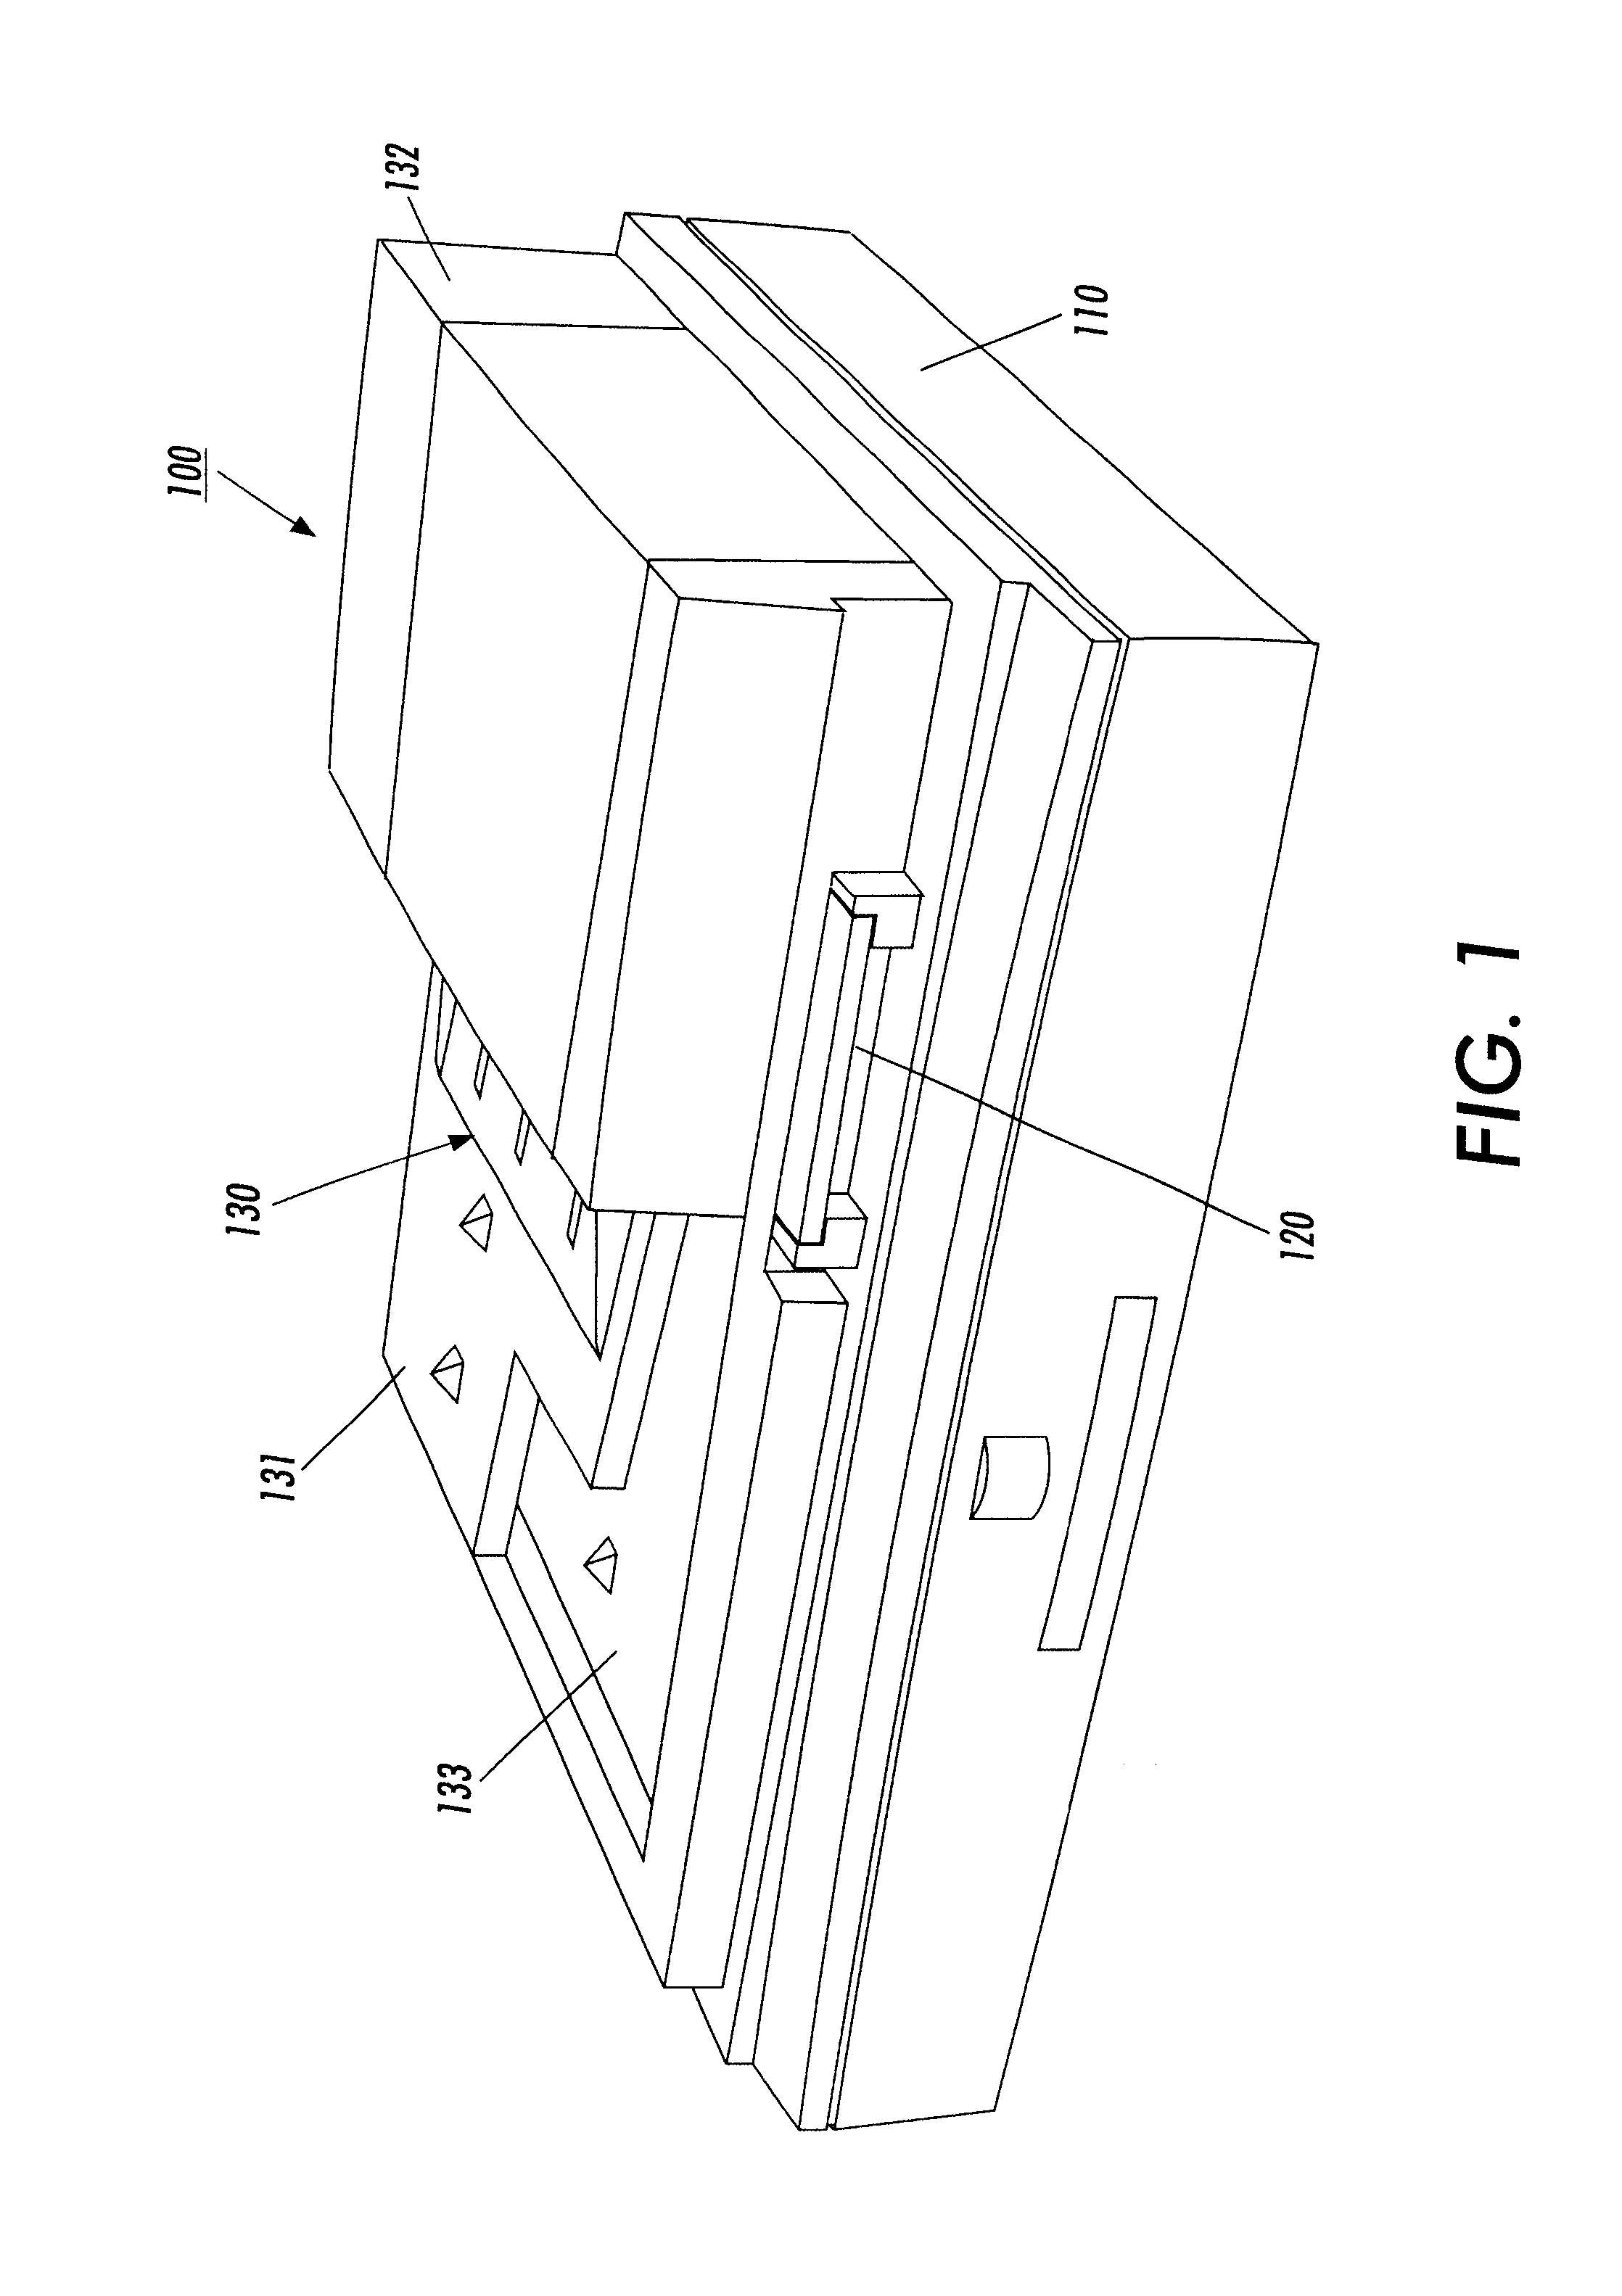 Systems and methods for providing original document orientation, tone reproduction curves and task specific user instructions based on displayed portions of a graphical user interface